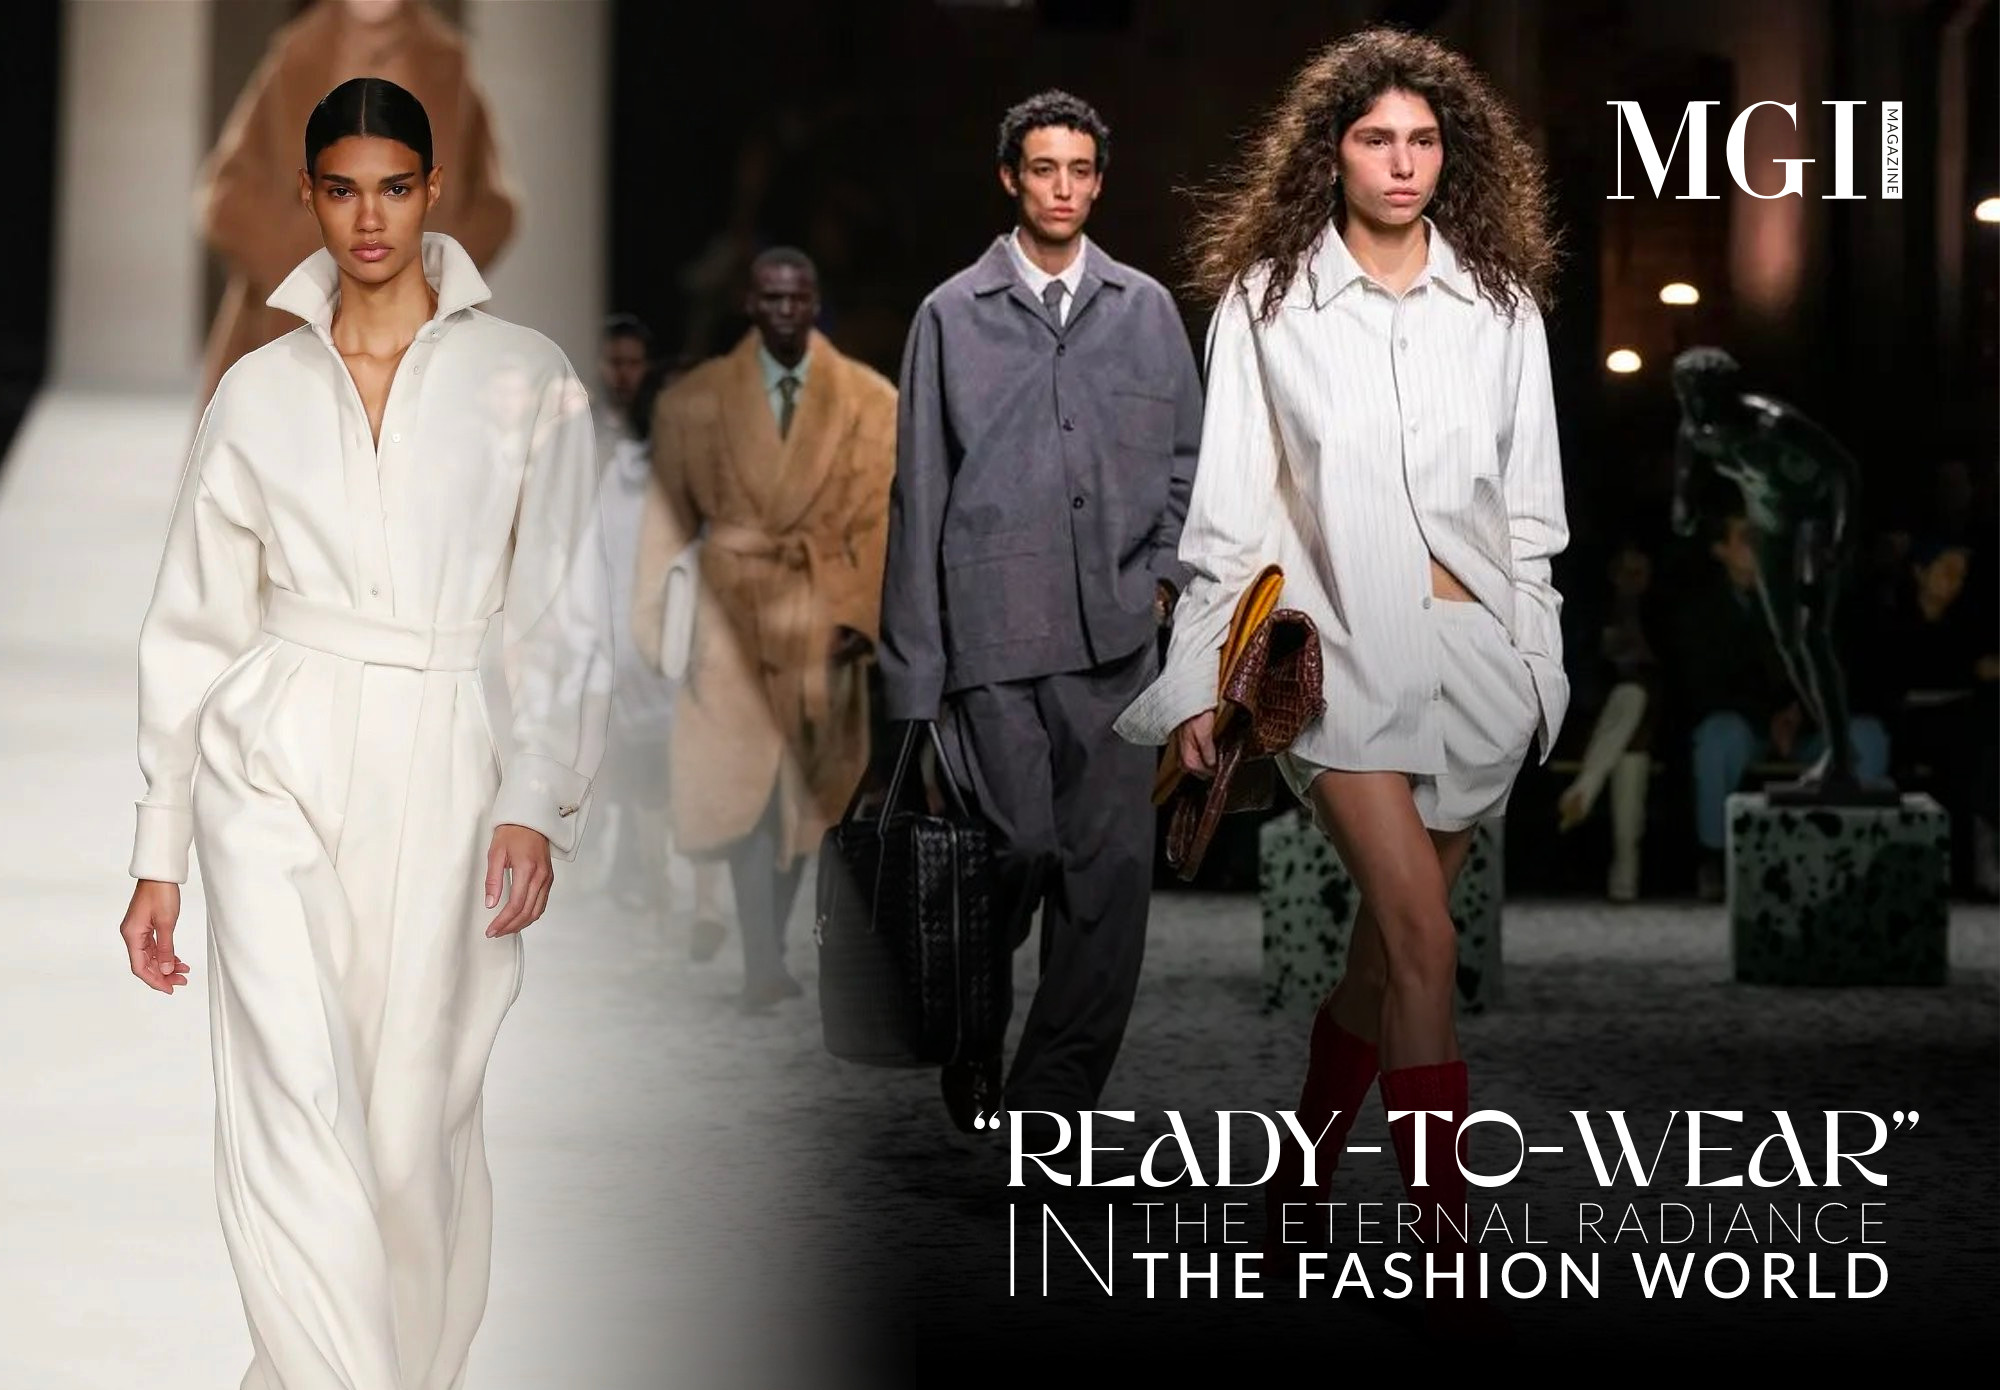 “Ready-to-wear” - The eternal radiance in the Fashion world